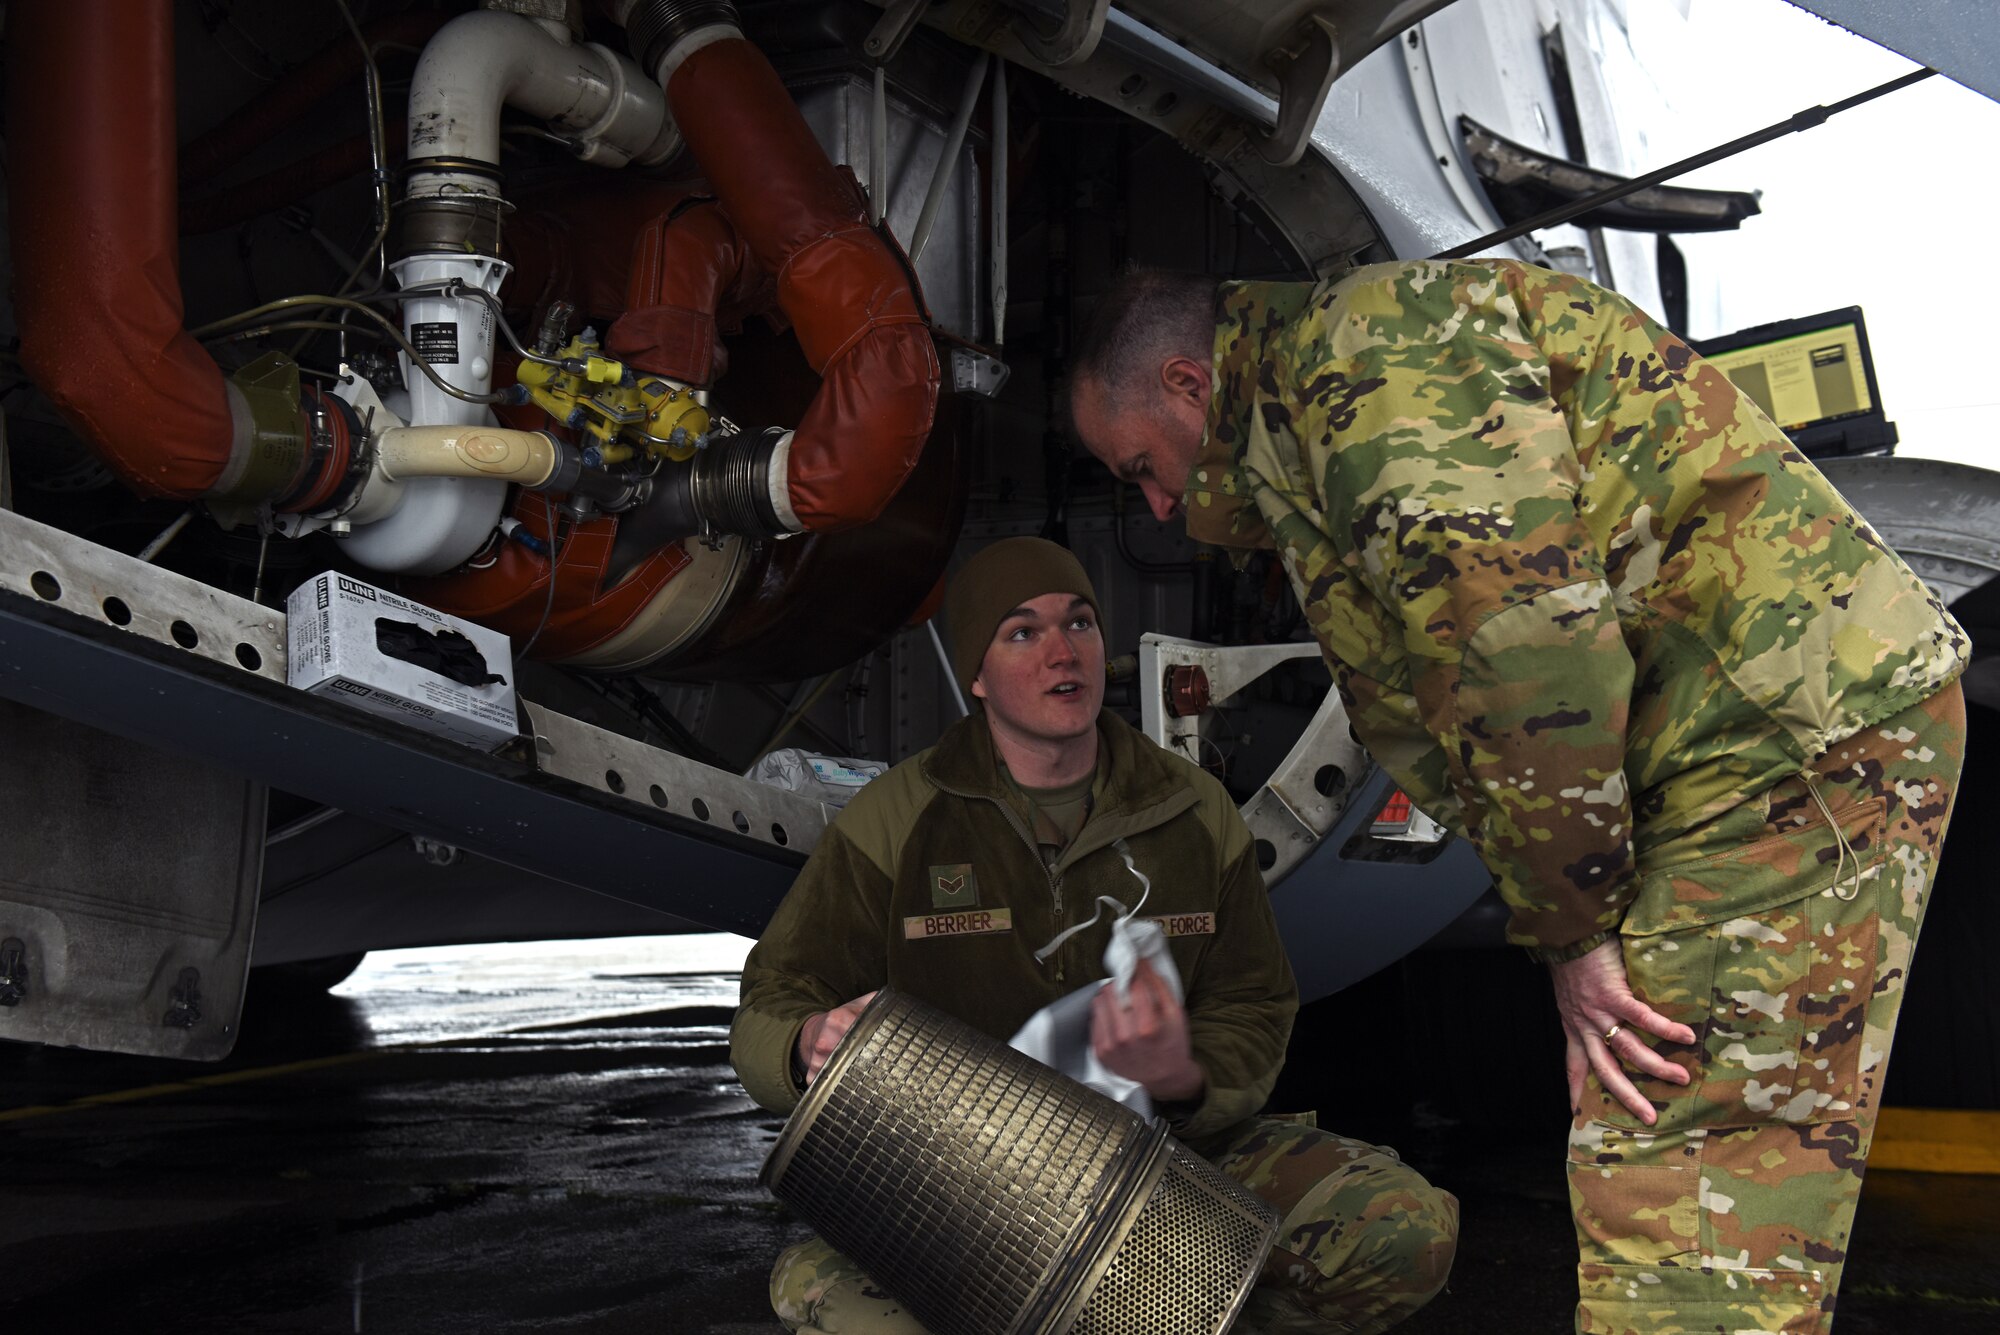 (From right) U.S. Air Force Maj. Gen. Thad Bibb, 18th Air Force commander, learns about C-17 Globemaster III maintenance from Senior Airman Stephen Berrier, instruments and flight control systems apprentice with the 62nd Aircraft Maintenance Squadron, during his visit at Joint Base Lewis-McChord, Washington, March 14, 2022. As Air Mobility Command’s sole numbered air force, 18th AF ensures the readiness and sustainment of approximately 36,000 active-duty, Air Force Reserve and civilian Airmen at 12 wings and one stand-alone group. With more than 400 aircraft, 18th Air Force supports AMC’s worldwide mission of providing rapid global mobility to America’s armed forces through airlift, aerial refueling and aeromedical evacuation. (U.S. Air Force photo/Senior Airman Zoe Thacker)